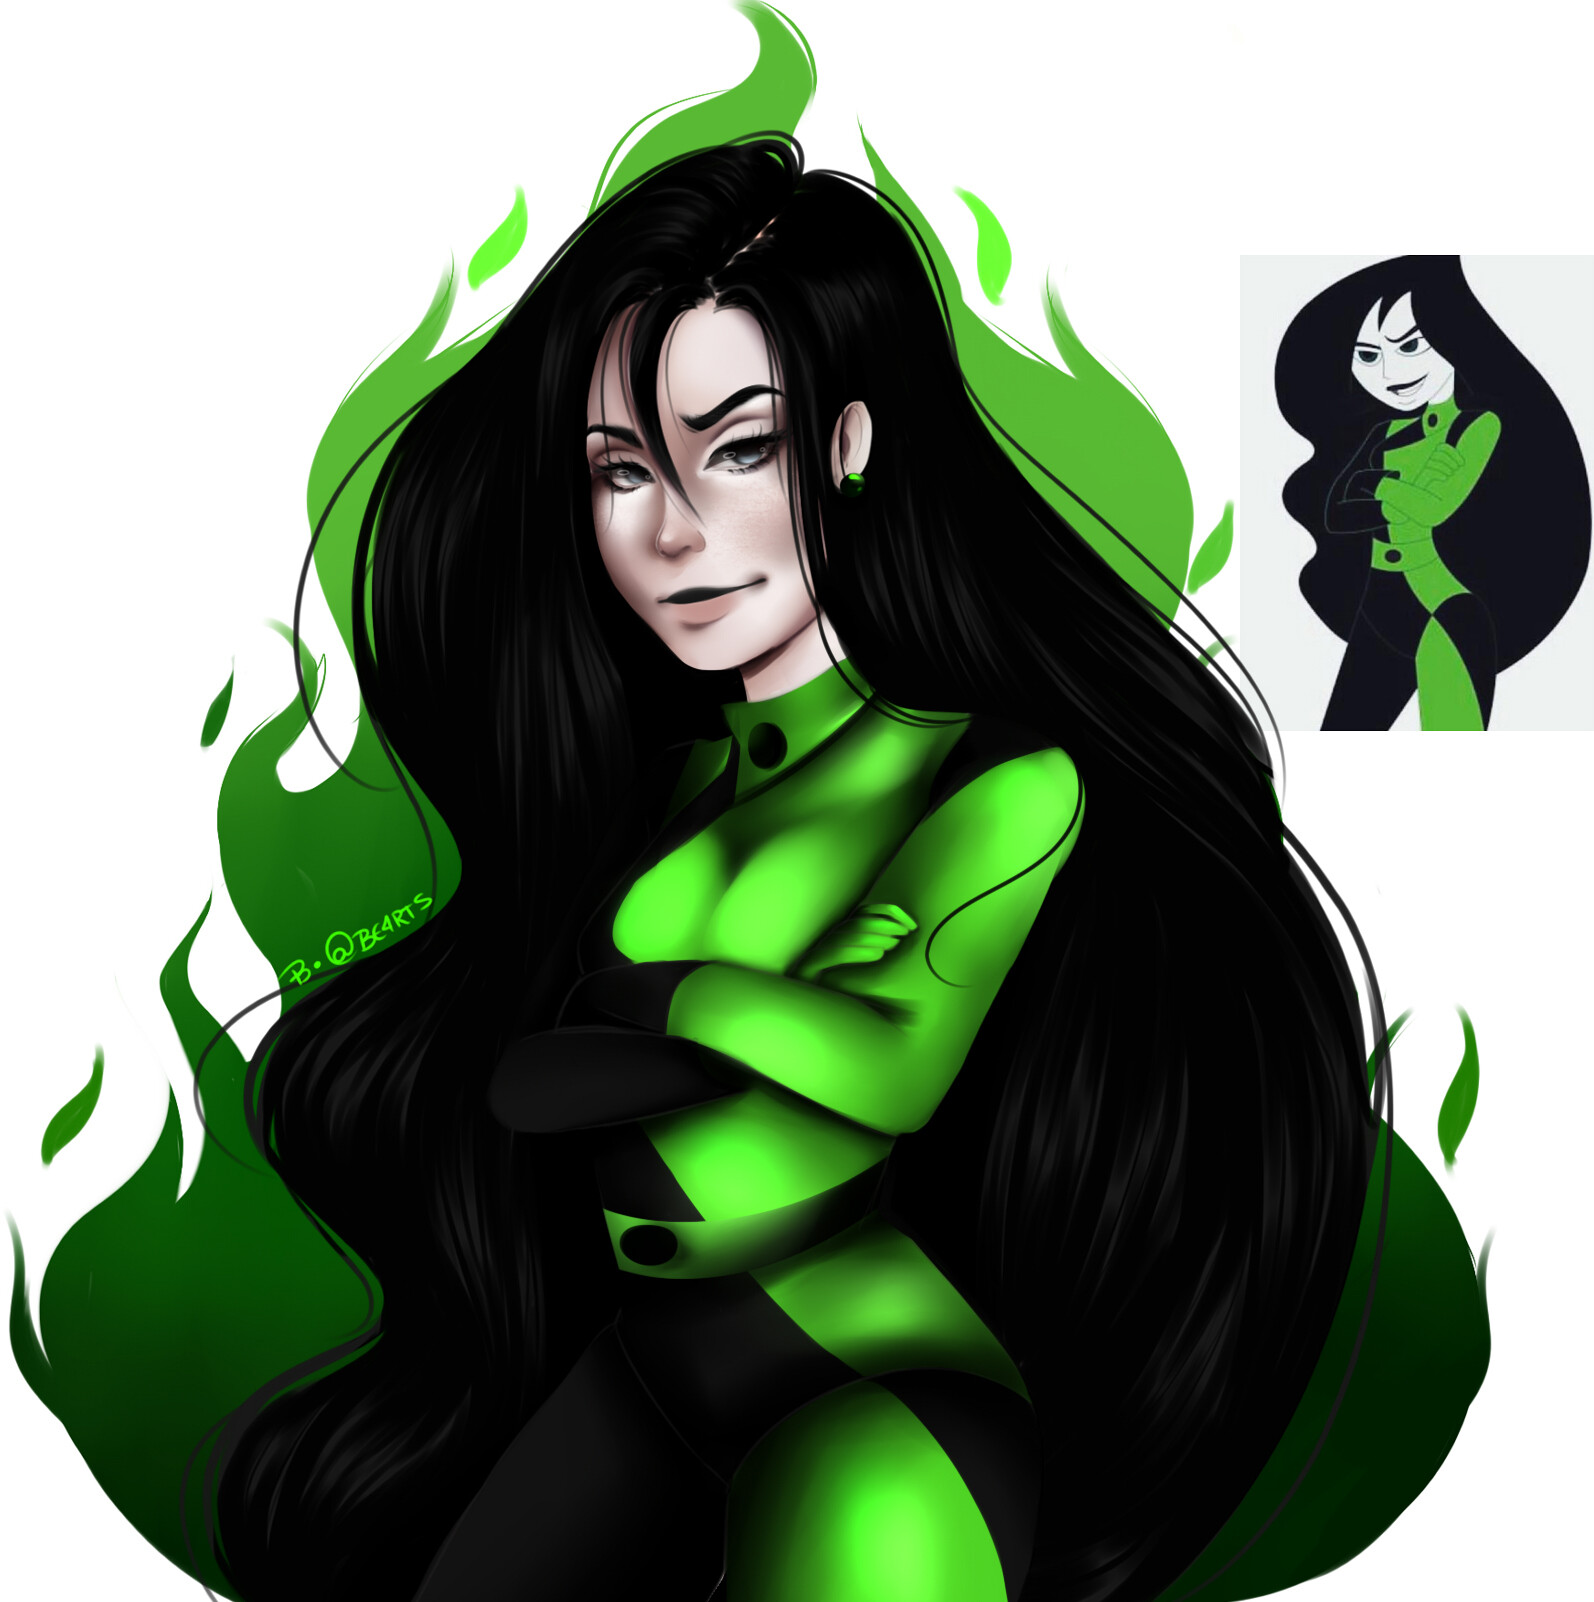 Shego from Kim Possible. 